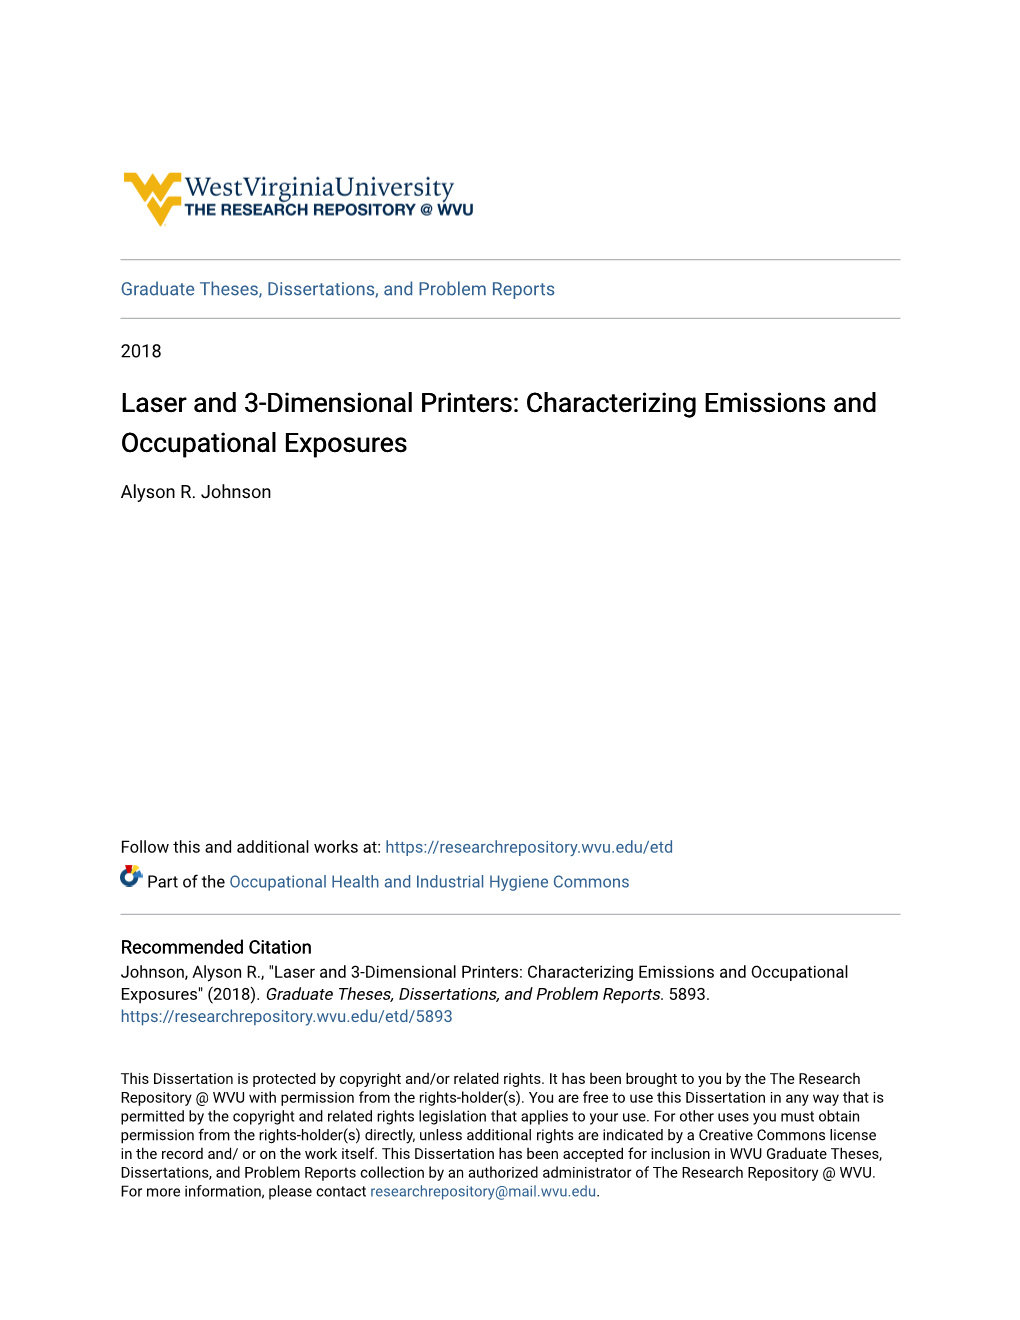 Laser and 3-Dimensional Printers: Characterizing Emissions and Occupational Exposures